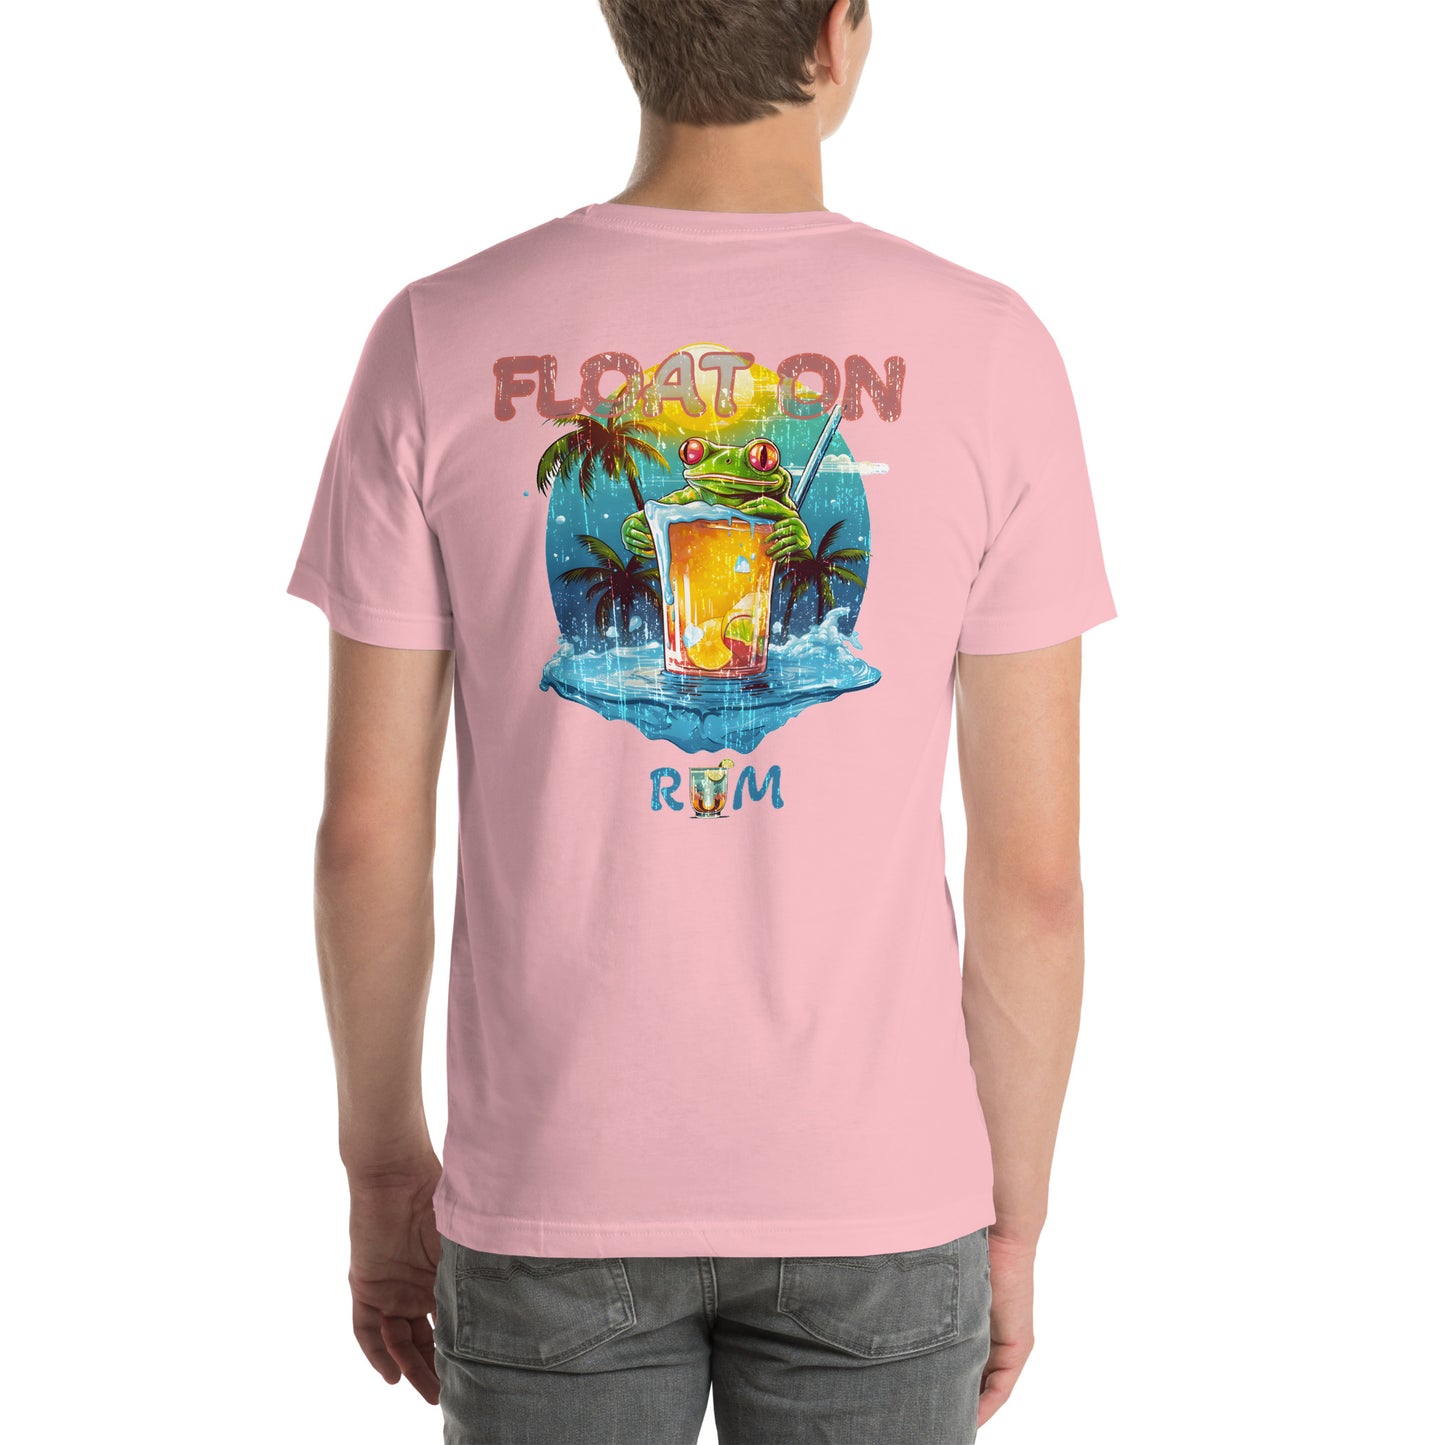 RUM: "Float On" Caribbean Amphibian T-Shirt: Sip Back and Relax